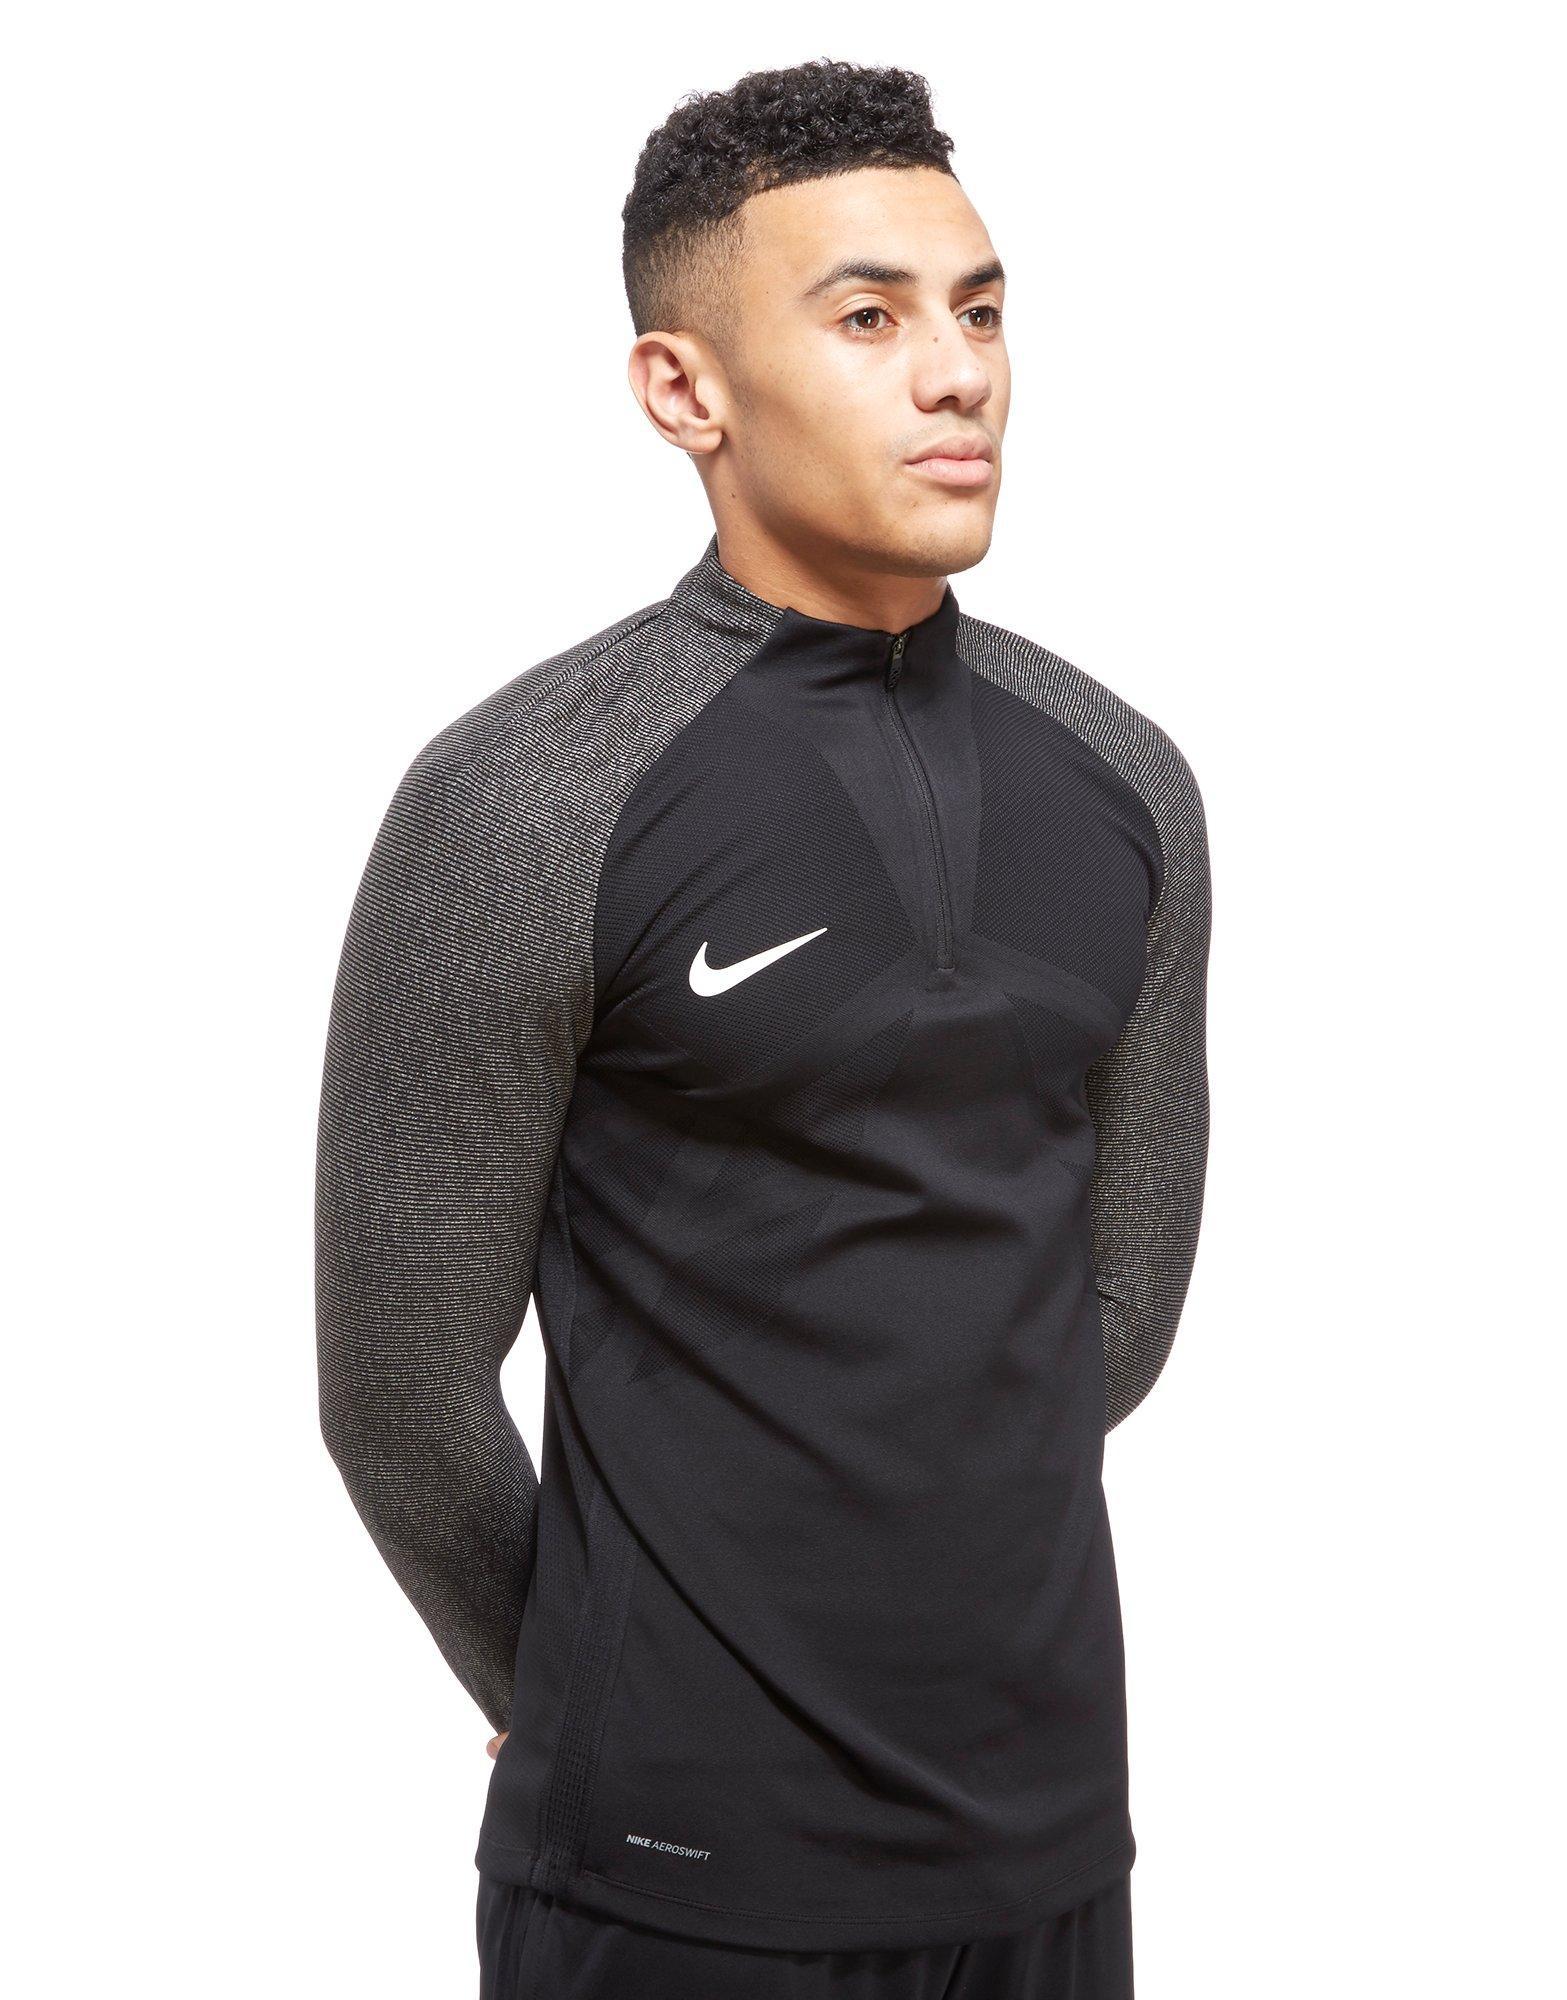 Nike Synthetic Aeroswift Strike Drill Football Top in Black for Men - Lyst